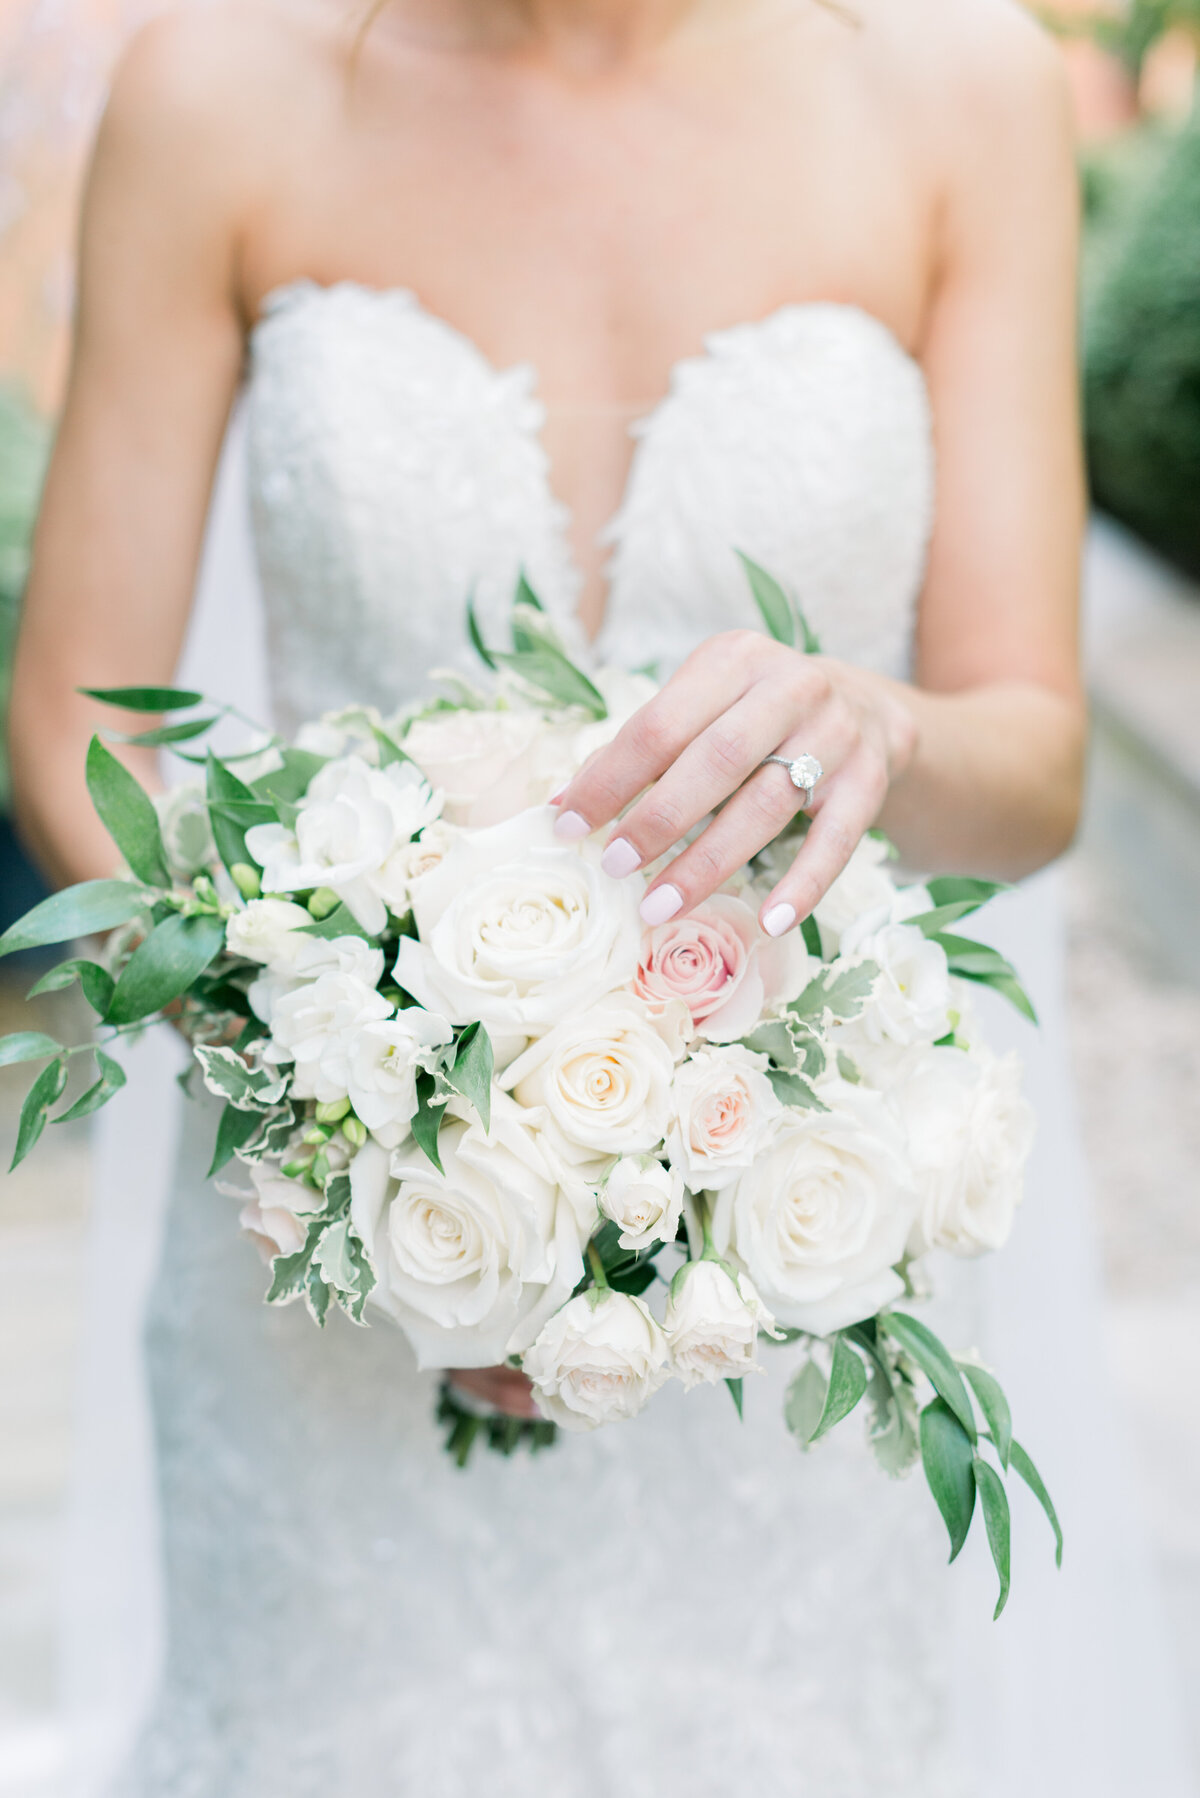 Classic and elegant wedding floral bouquet with bride's engagement ring at Glenmere Mansion in new York.